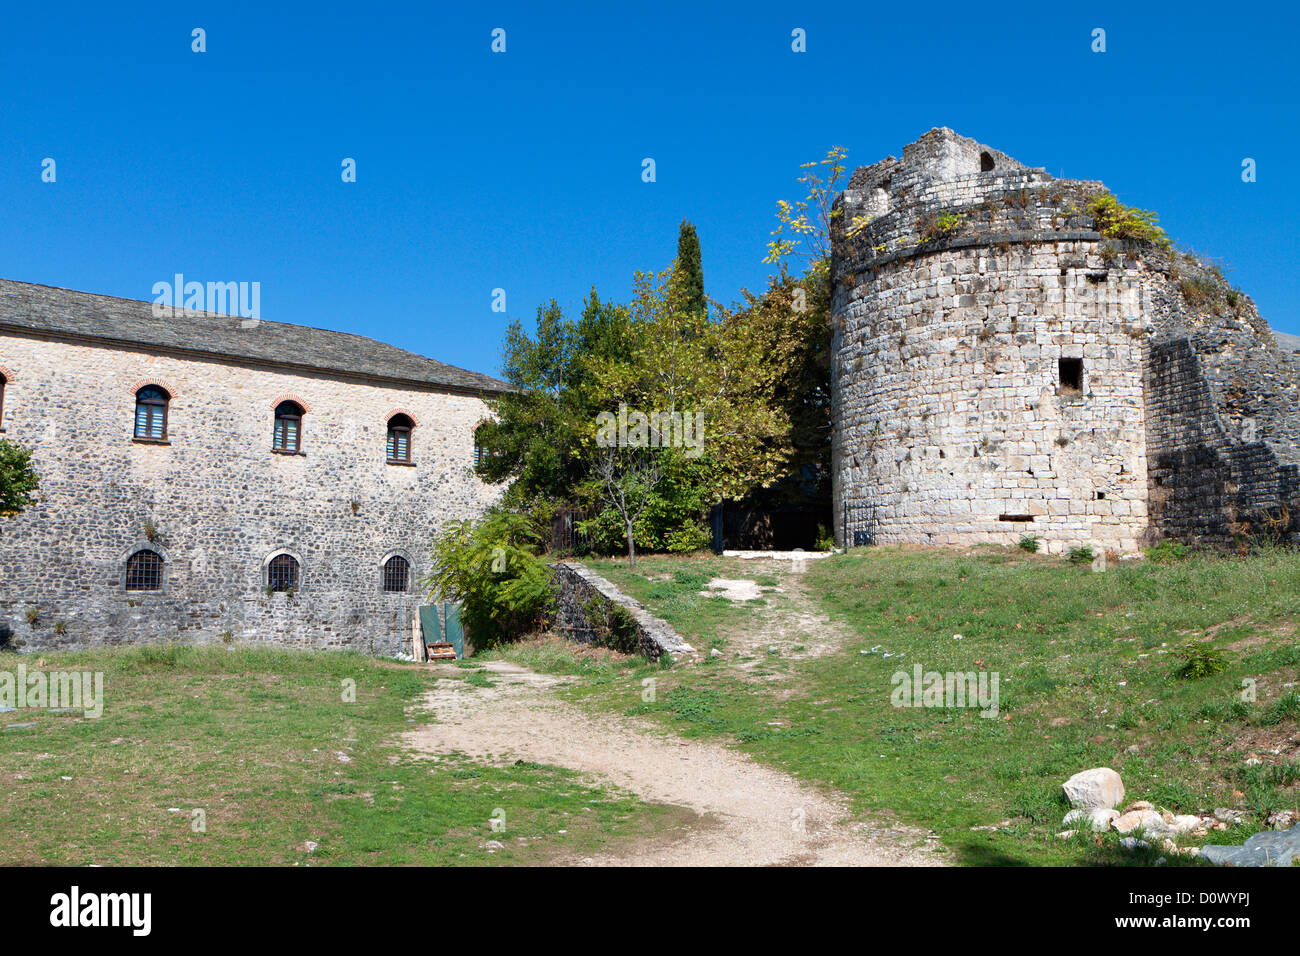 Its Kale castle at Ioannina city in Greece Stock Photo